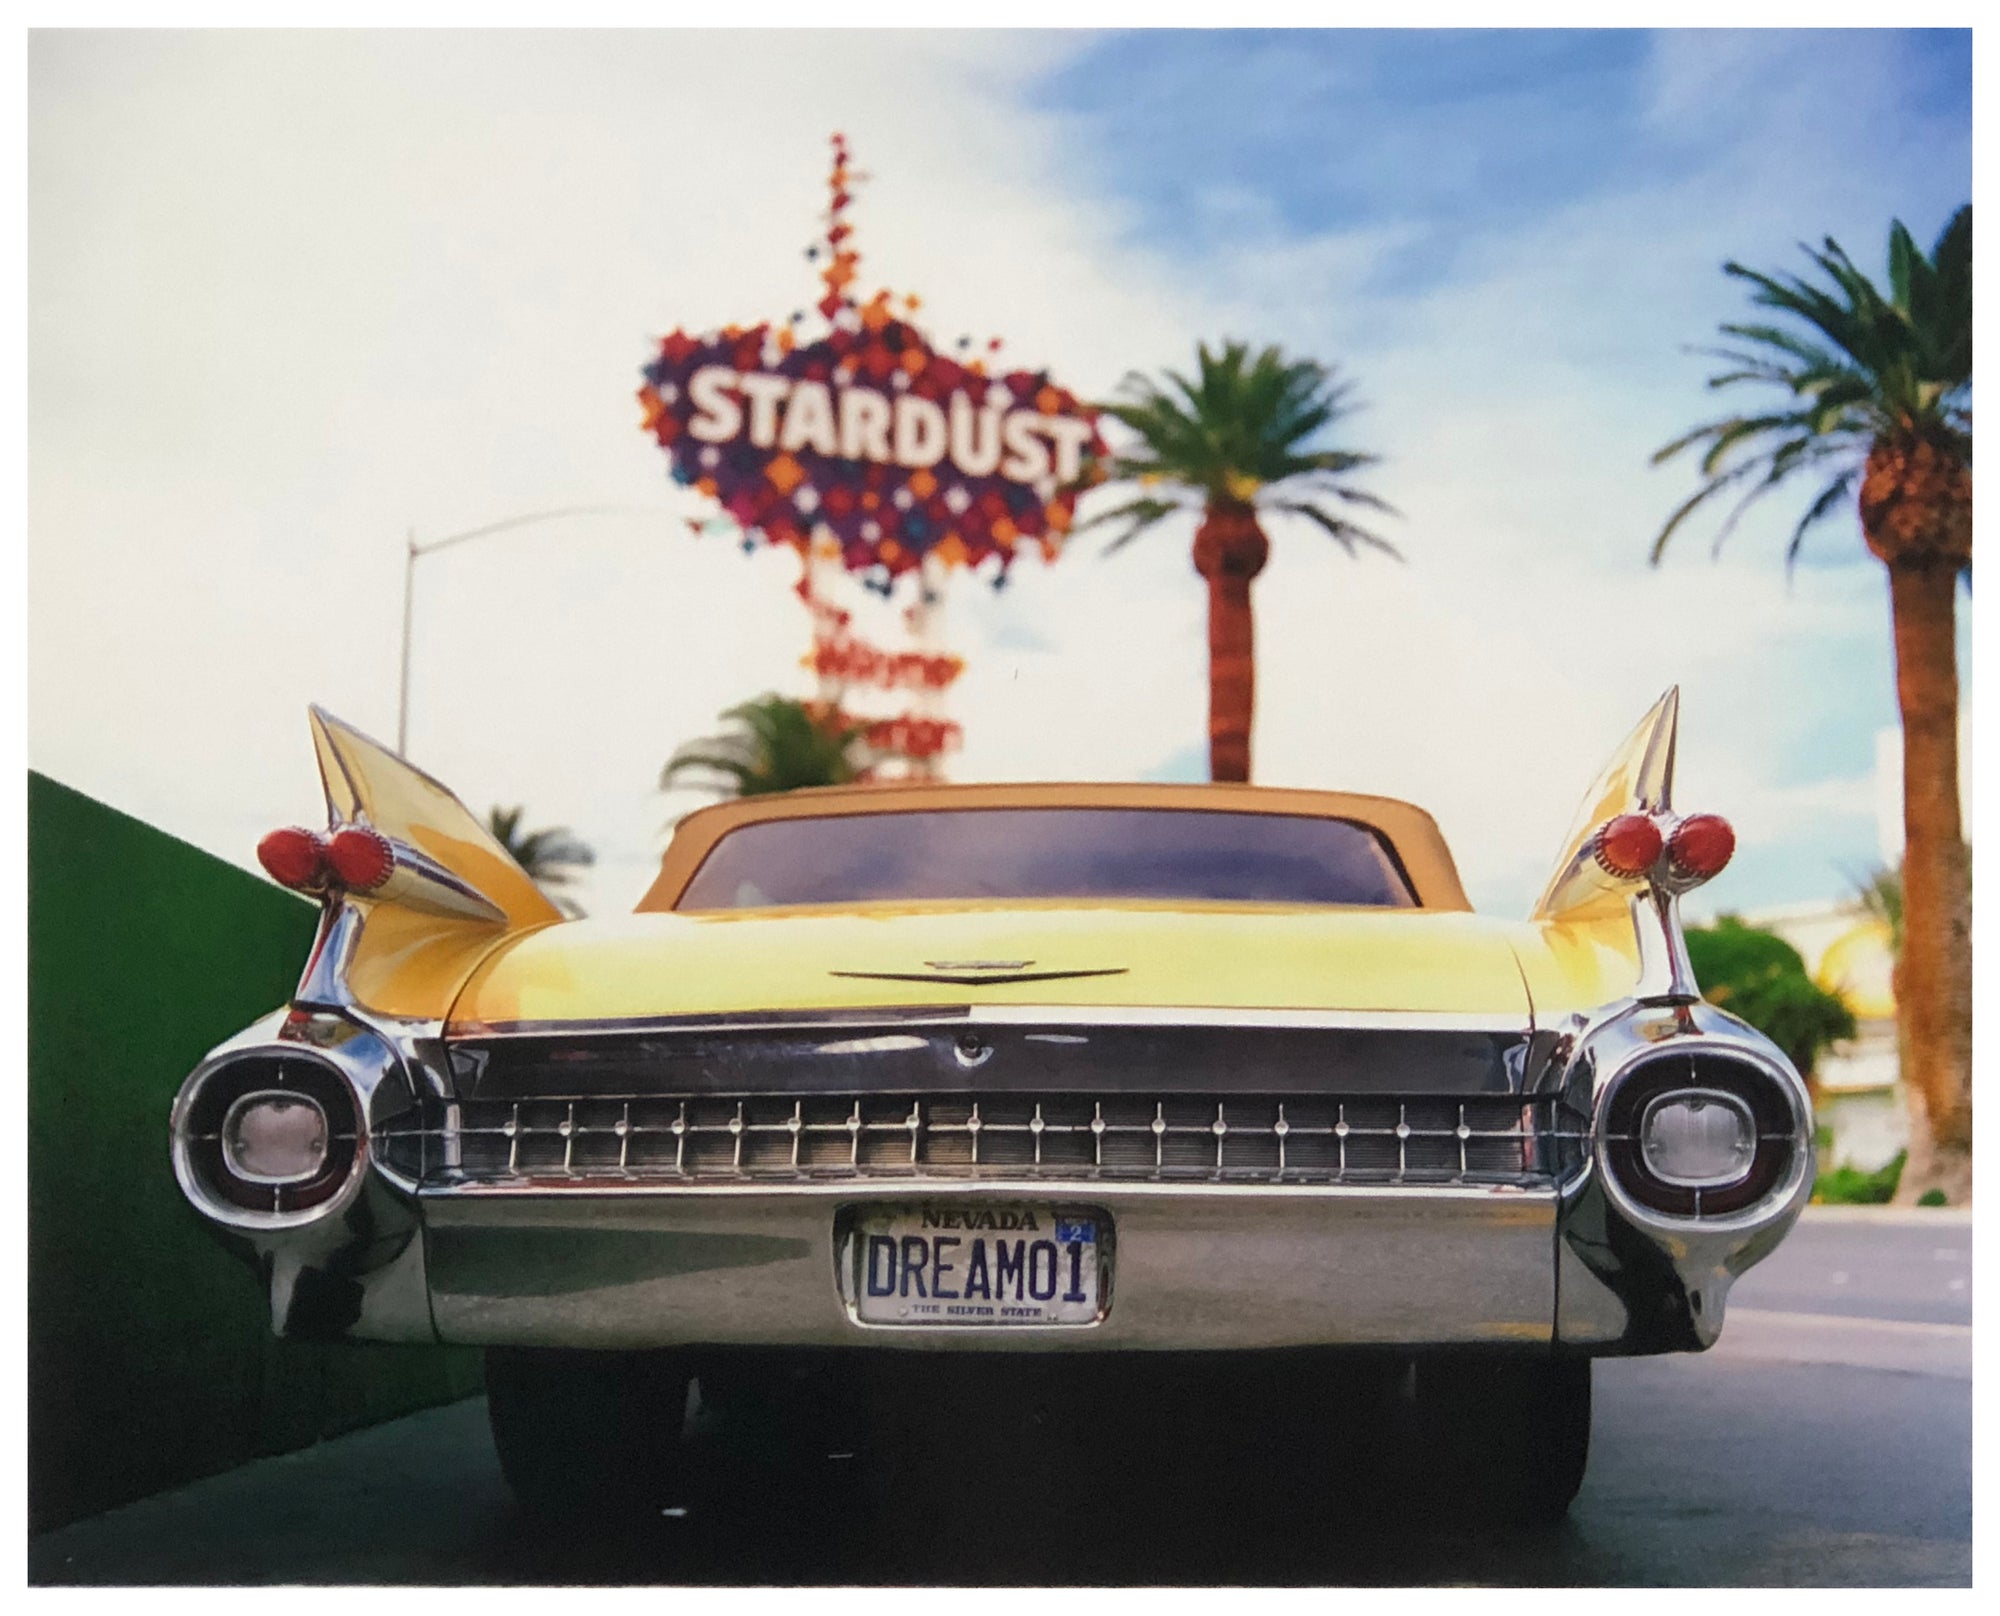 Photograph by Richard Heeps.  The back end of the classic American car with a number place DREAM01 sits underneath the STARDUST casino sign.